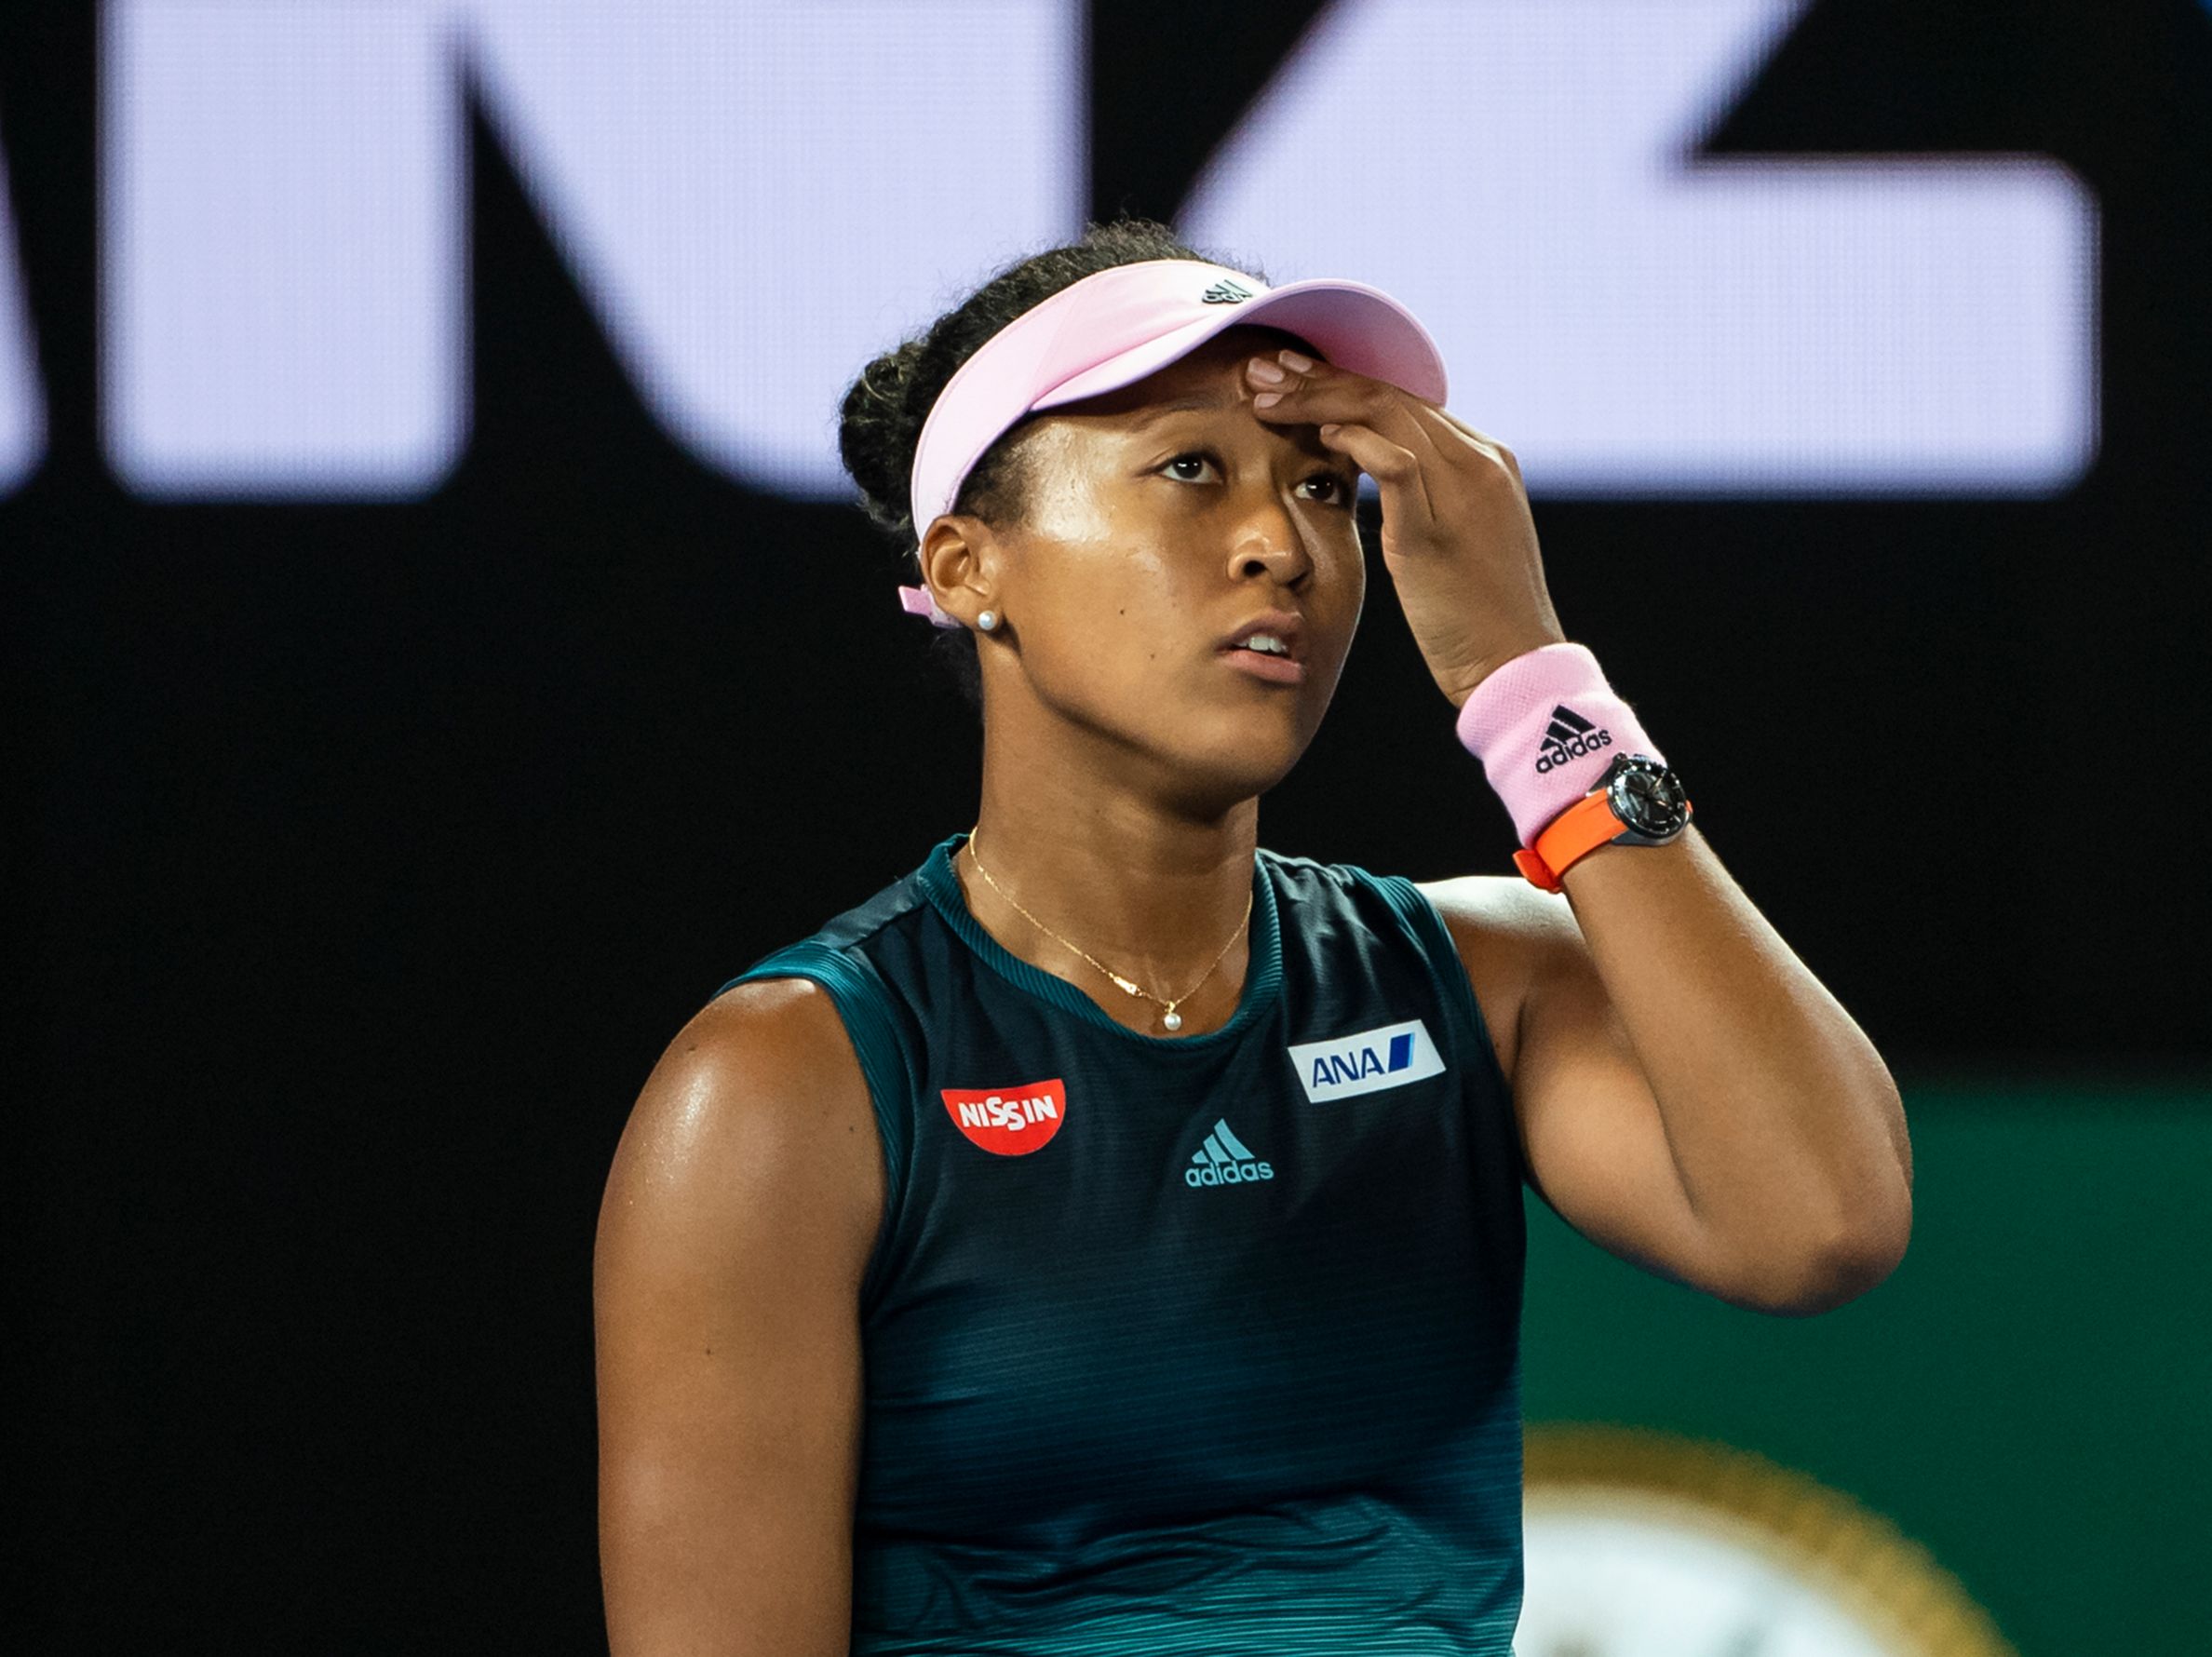 Naomi Osaka of Japan looks frustrated against Petra Kvitova of the Czech Republic at day 13 of the 2019 Australian Open at Melbourne Park on January 26, 2019 | Photo: Getty Images